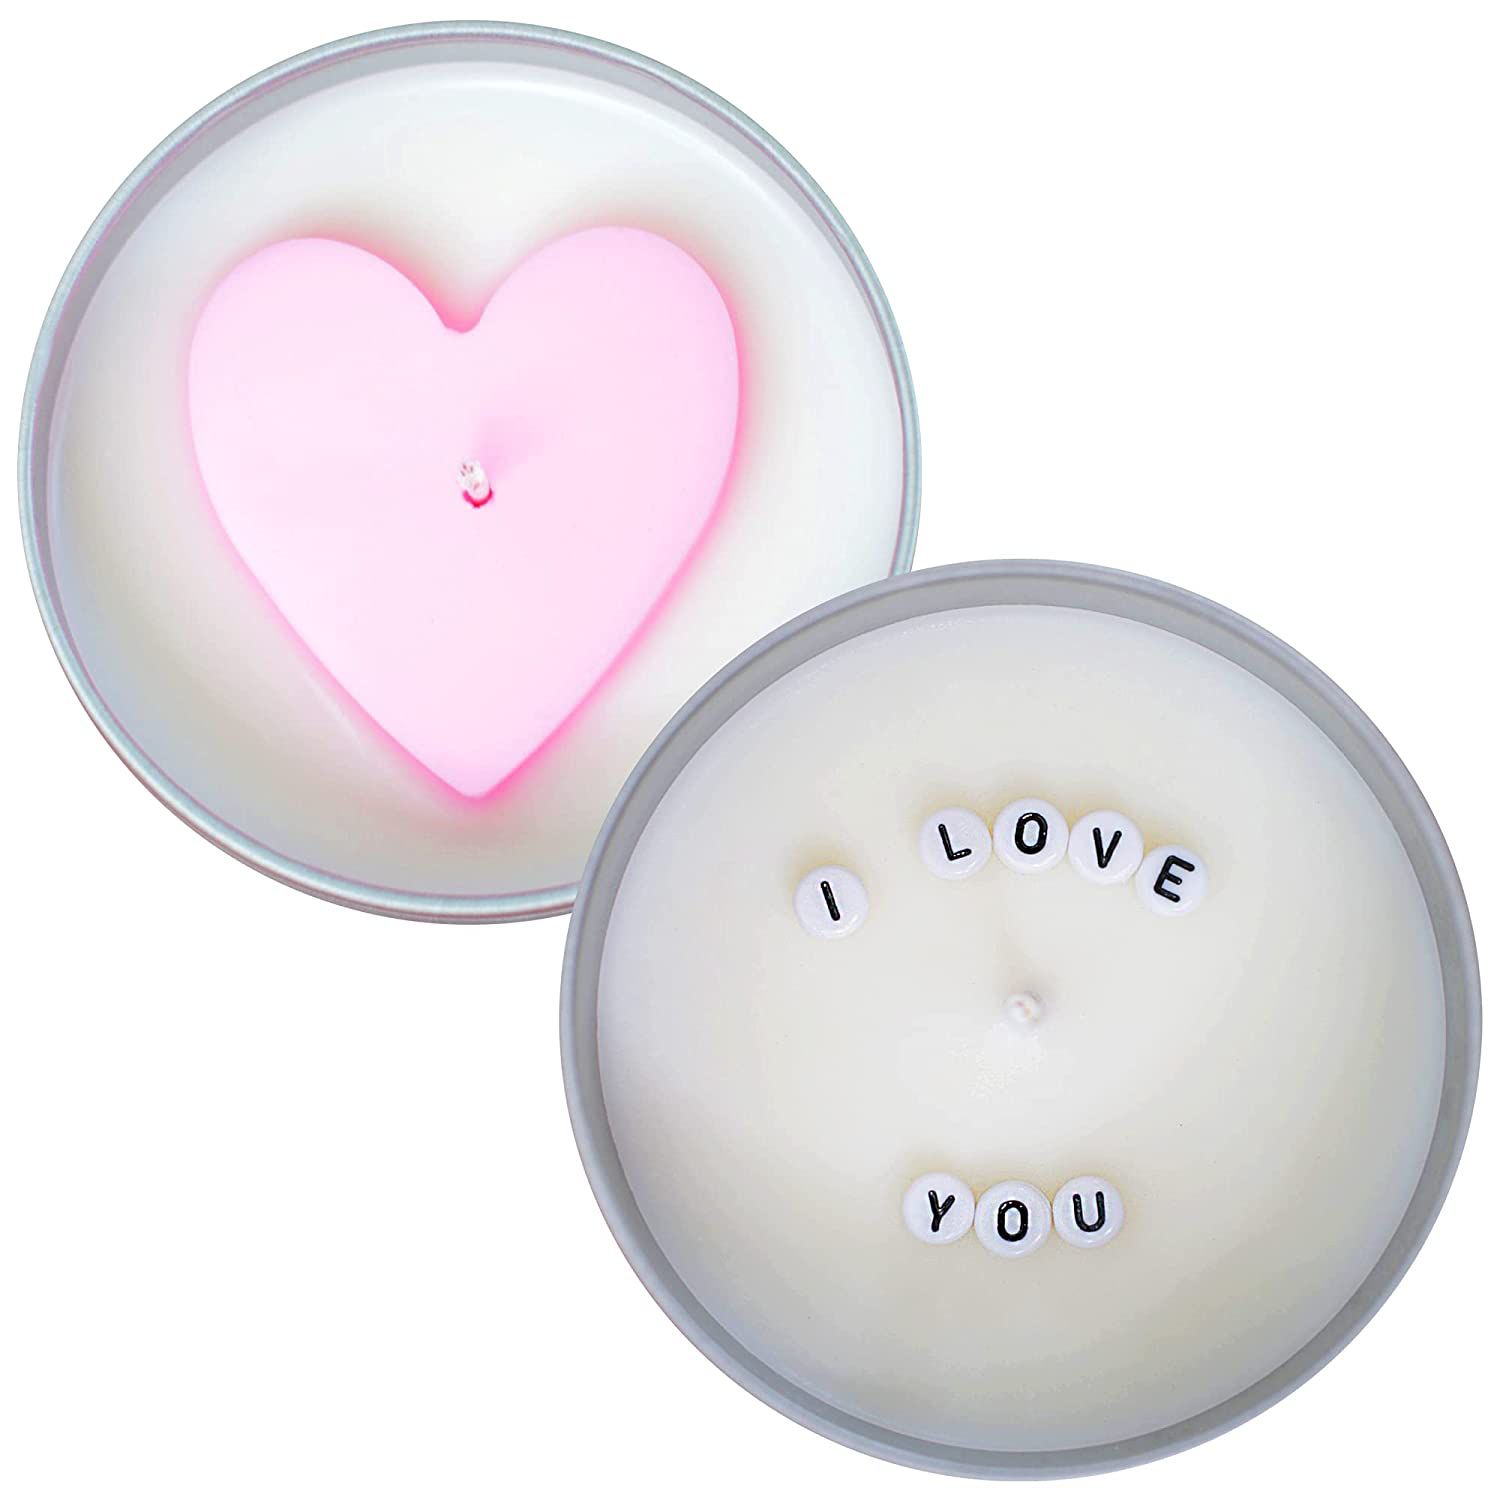 Hidden message with a heart candle